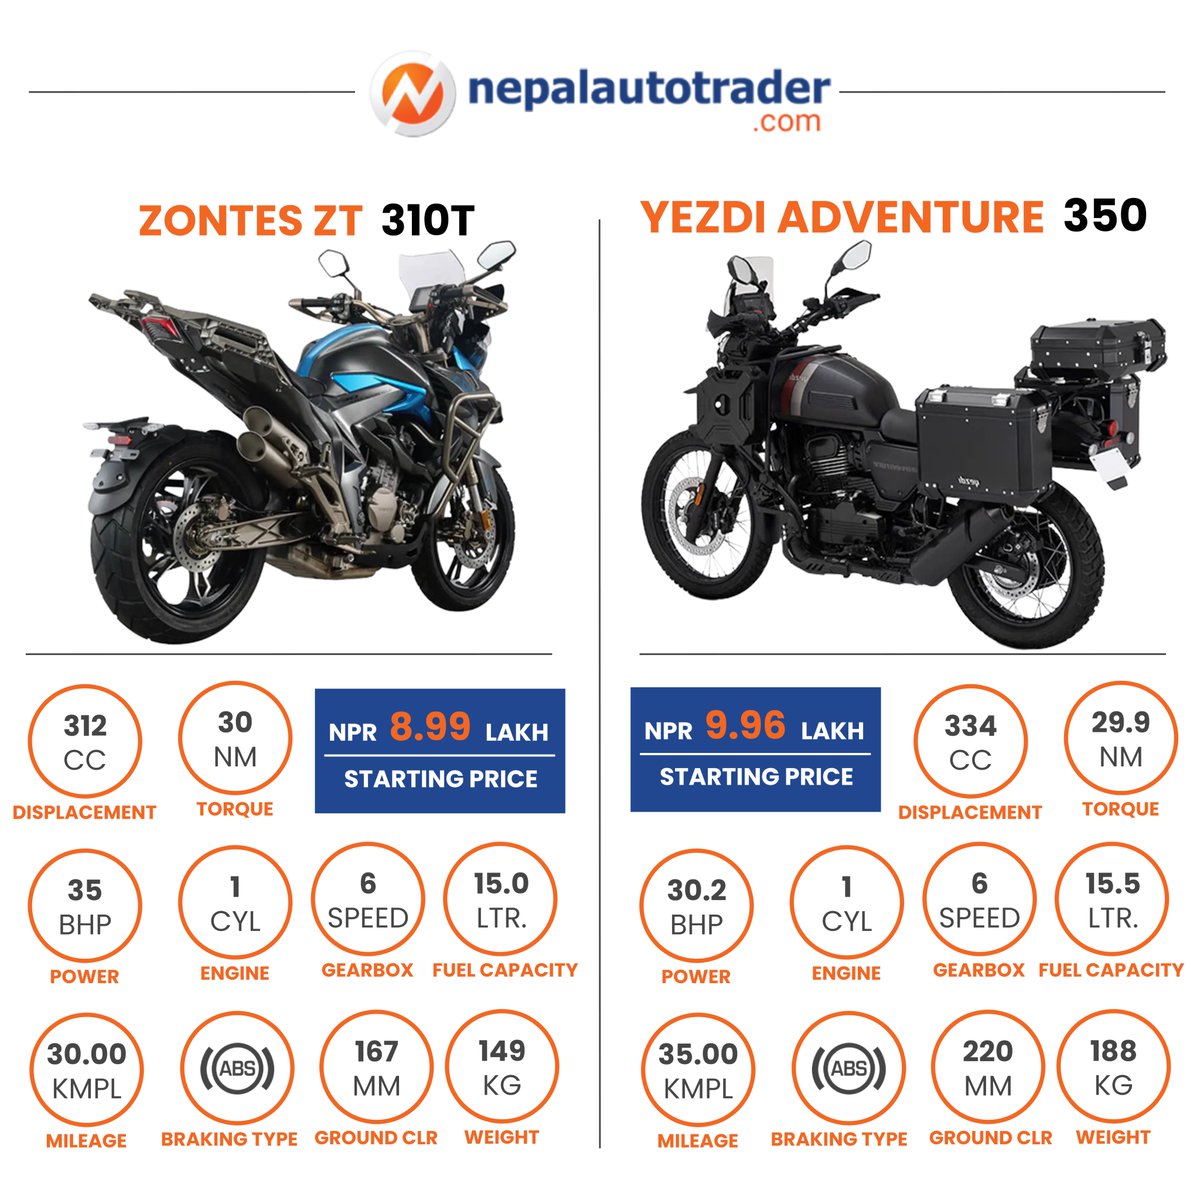 Here is a quick comparison between Zontes ZT 310T and Yezdi Adventure. #Autonews #AutonewsNepal #Bikes #BikesNepal #AdventureMotorbike #ZontesBikes #ZontesNepal #ZontesZT310T #YezdiBikes #YezdiNepal #YezdiAdventure #NepalAutoTrader